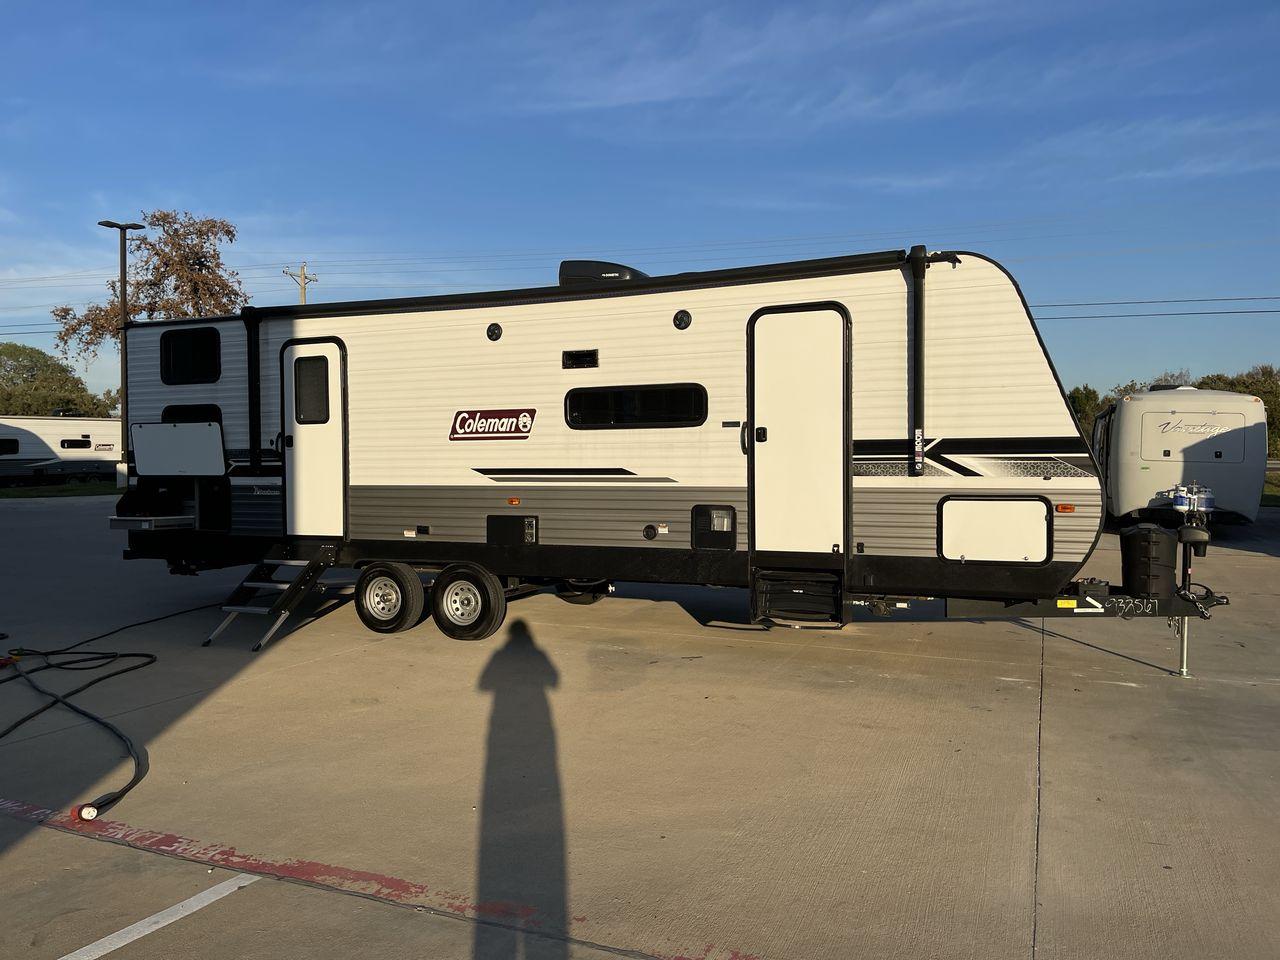 2022 KEYSTONE COLEMAN 285BH (4YDTCMN28NH) , Length: 32.75 ft | Dry Weight: 6,611 lbs. | Slides: 1 transmission, located at 4319 N Main St, Cleburne, TX, 76033, (817) 678-5133, 32.385960, -97.391212 - Experience the ultimate blend of comfort and adventure with the 2022 Keystone Coleman 285BH. This meticulously designed travel trailer is perfect for enhancing your camping experience. Adjusting the specifications, this model extends to a generous 32.75 feet with a dry weight of 6,611 lbs, providing - Photo #24